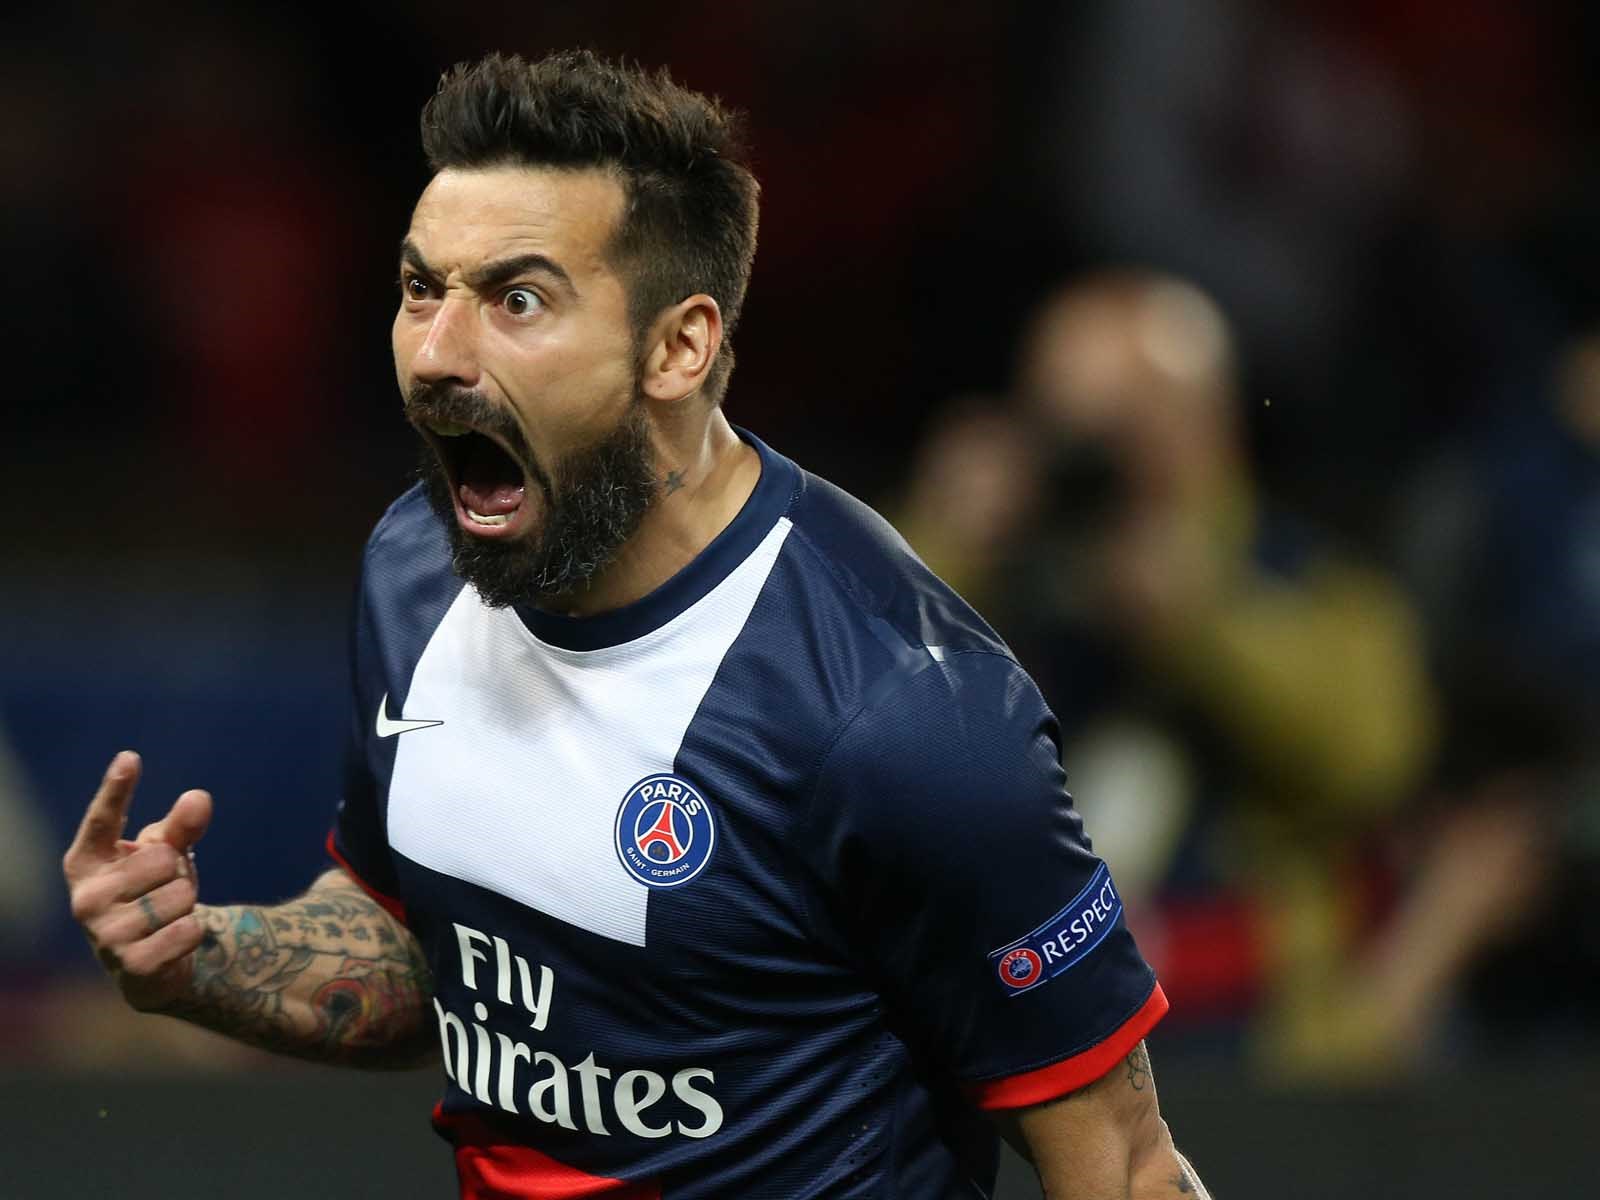 GdS – Inter in pole position for Lavezzi, he could arrive in January